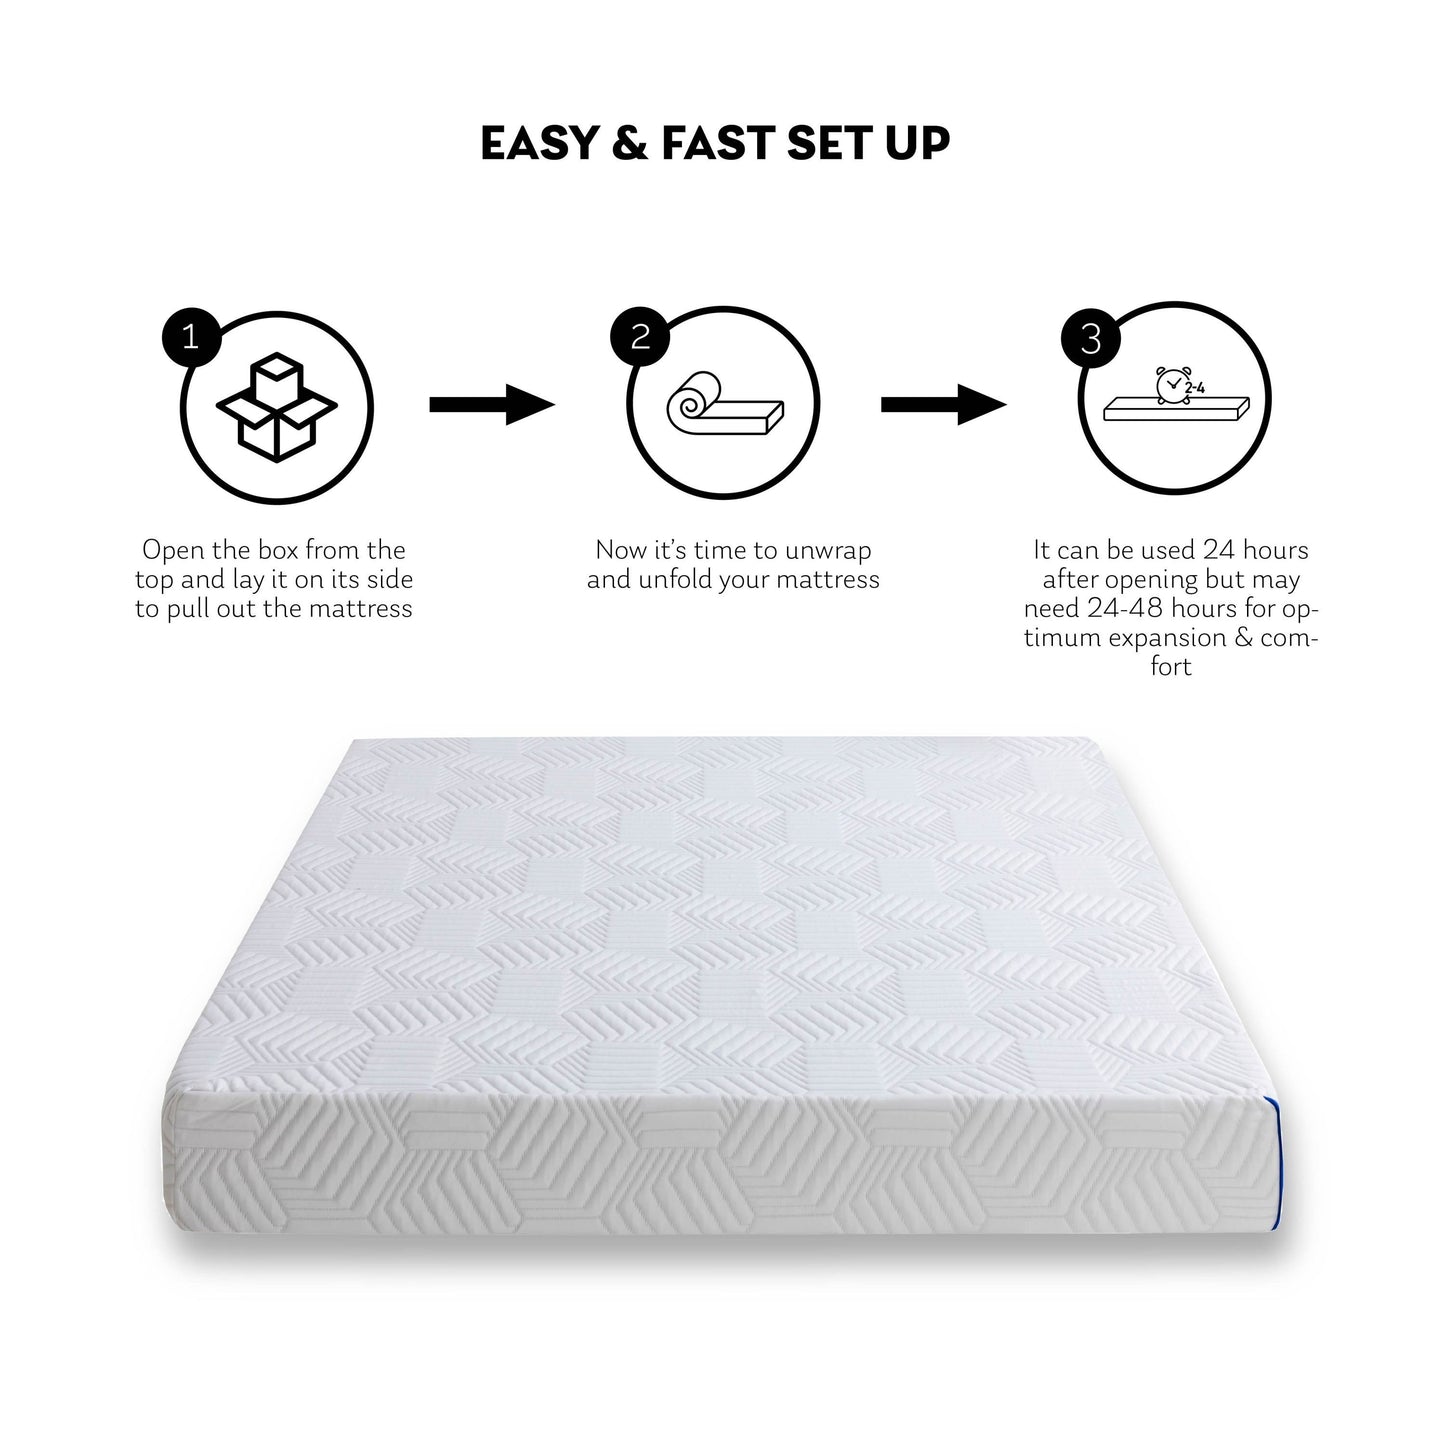 10 Inch Cal King Gel Memory Foam Mattress, White, Bed in a Box, Green Tea and Cooling Gel Infused, CertiPUR-US Certified